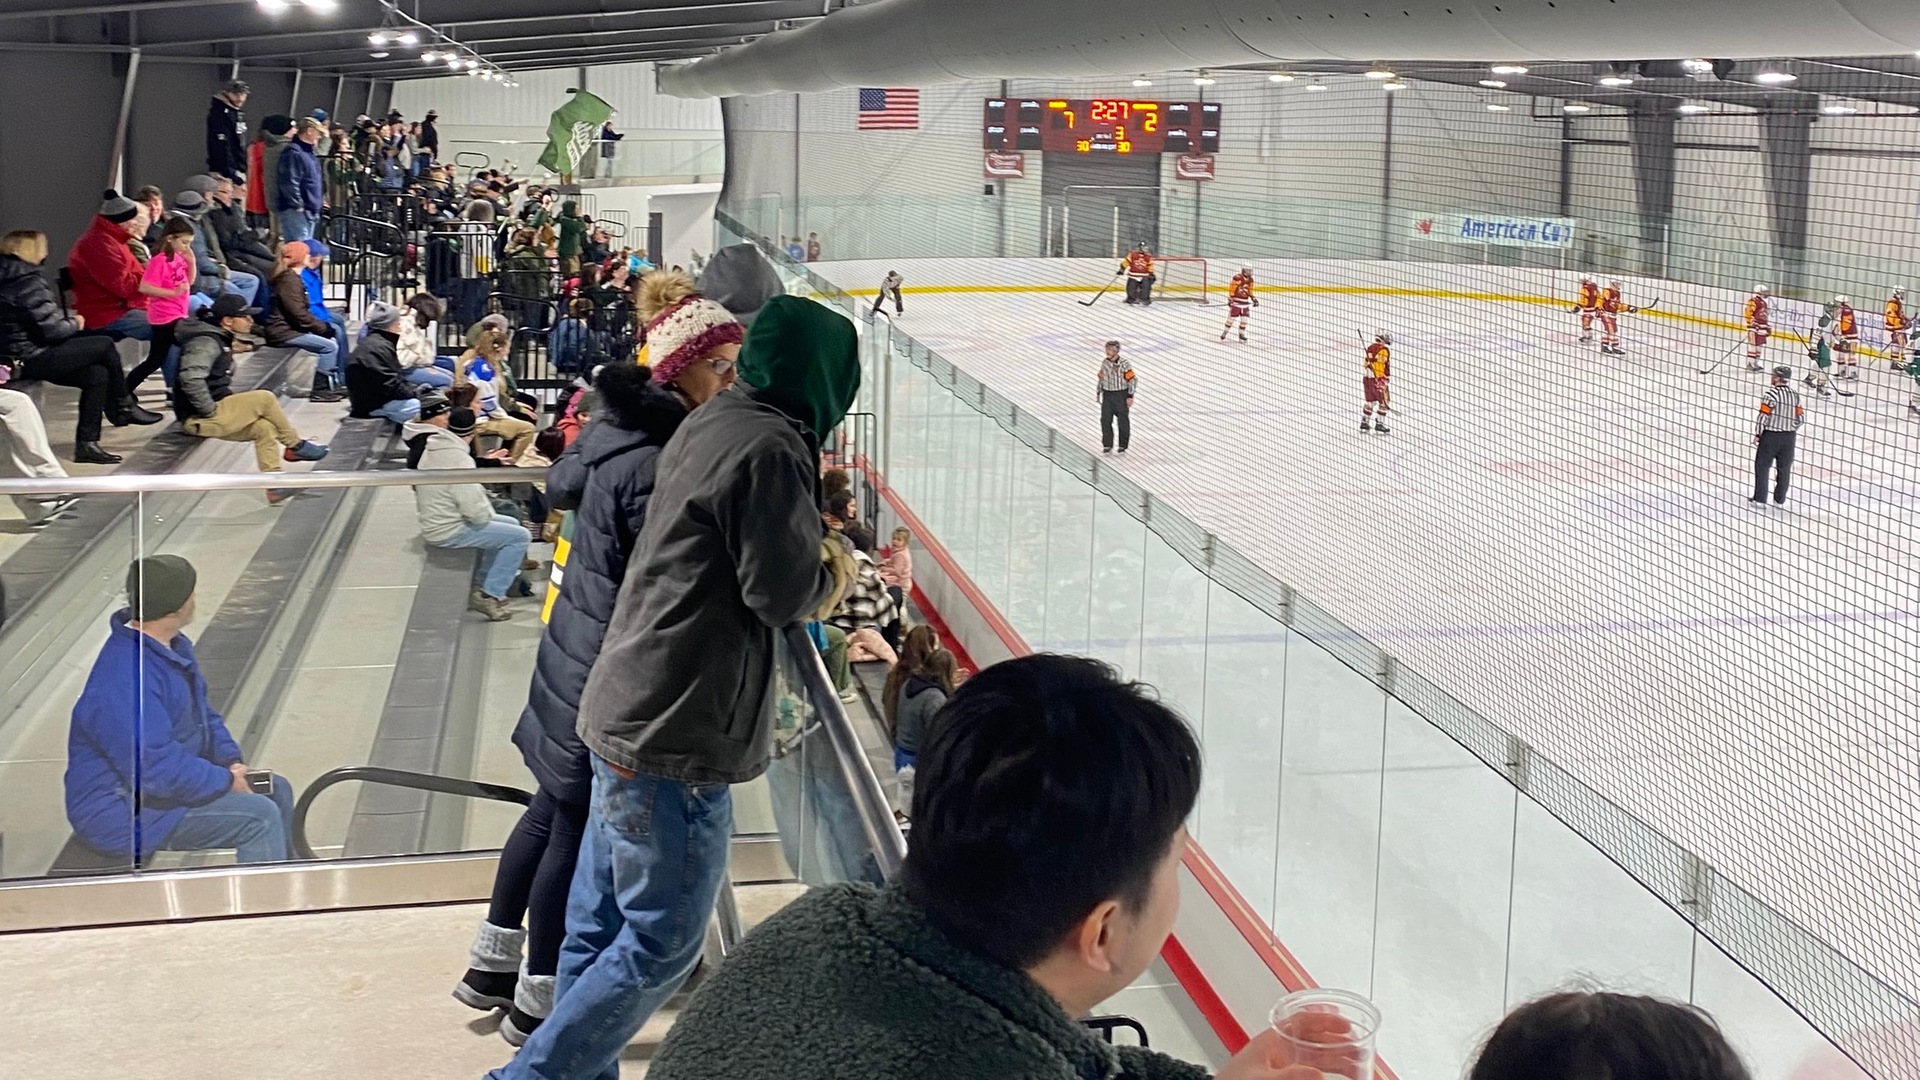 The men&rsquo;s hockey team beat the Jefferson CC Cannoneers 7-2 on Friday night in front of an estimated 600 people. Thumbnail